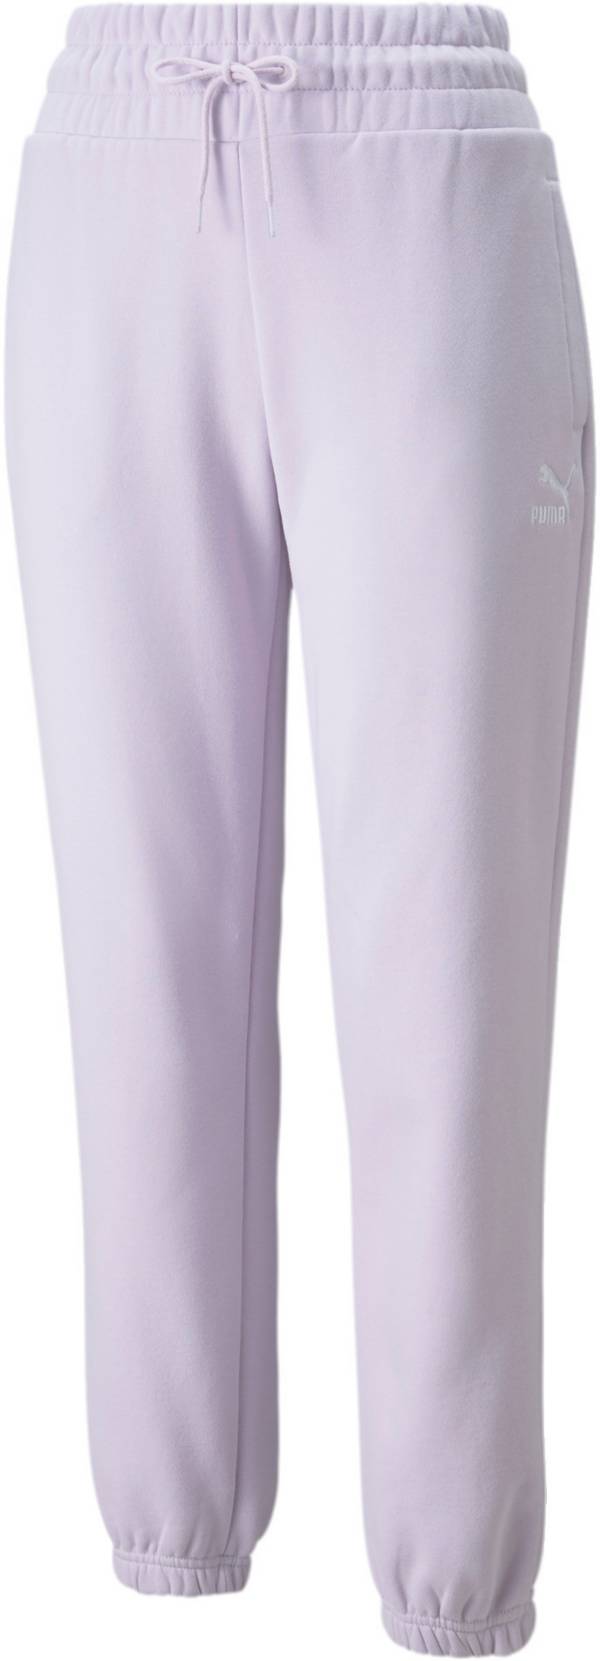 Misleidend Superioriteit formule PUMA Women's Classics Relaxed Pants | Dick's Sporting Goods